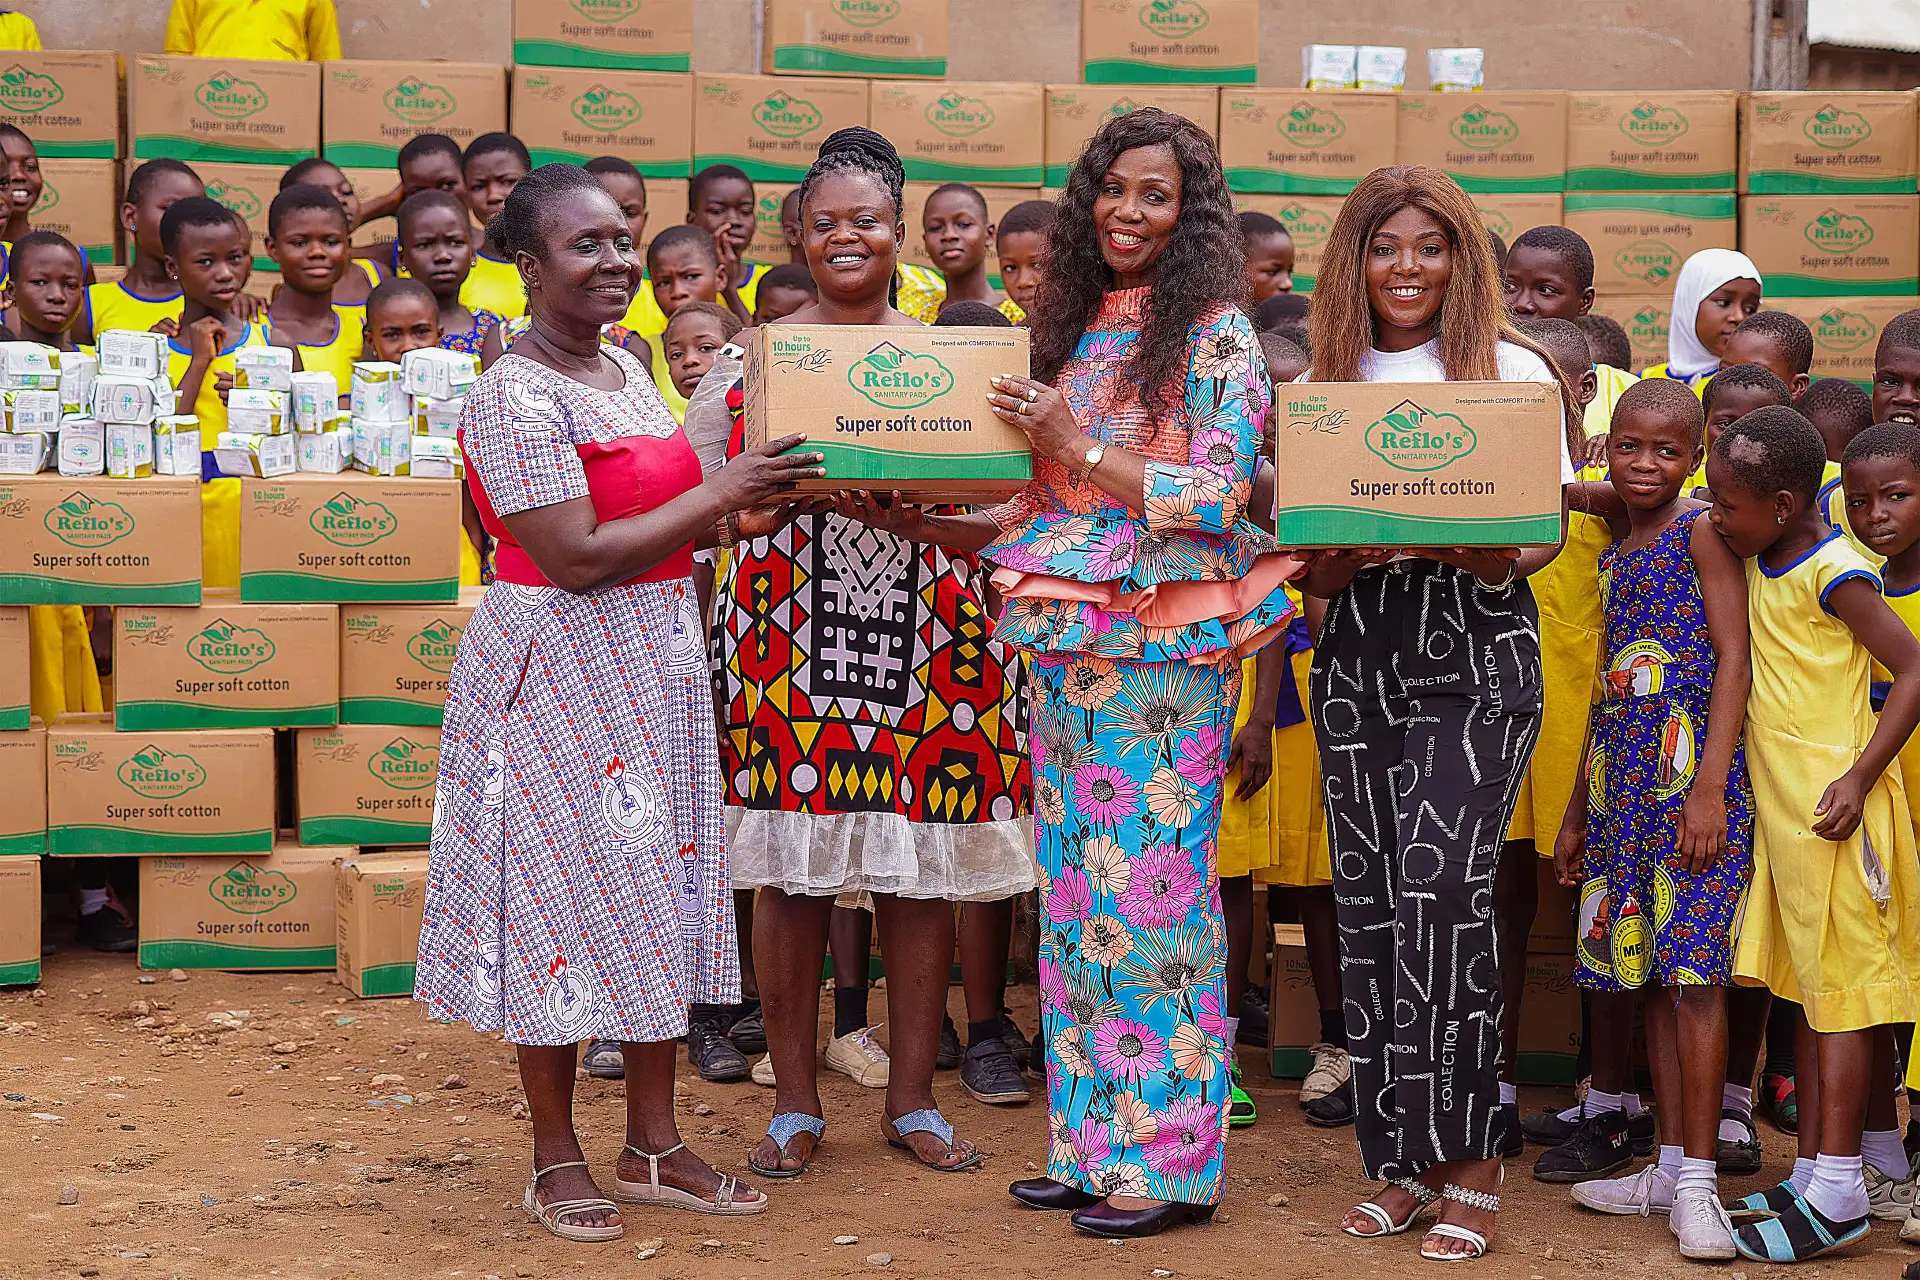 Reflo Company and Florence Mensah Foundation Empower Underprivileged Girls  with Sanitary Pad Donation - EdwardAsare - Digital Marketer, PR, Blogger